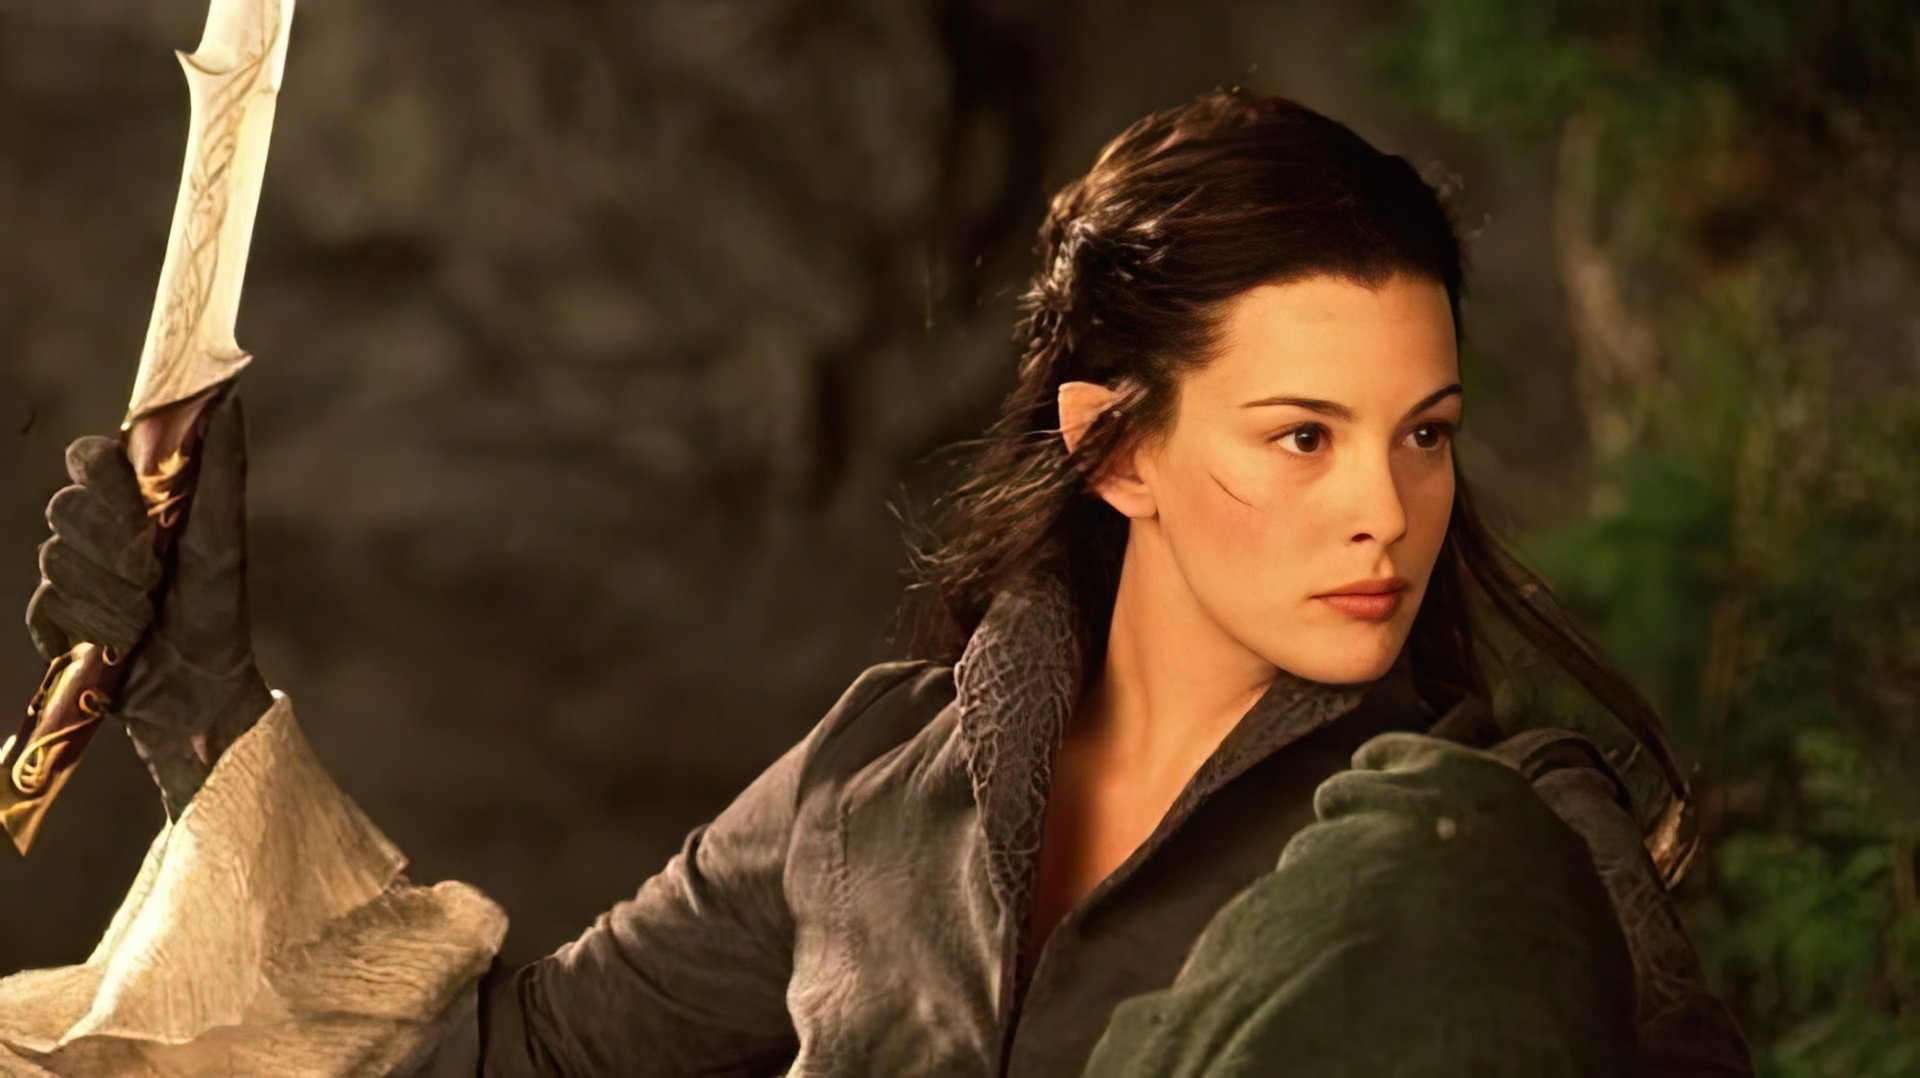 Liv Tyler in The Lord of the Rings